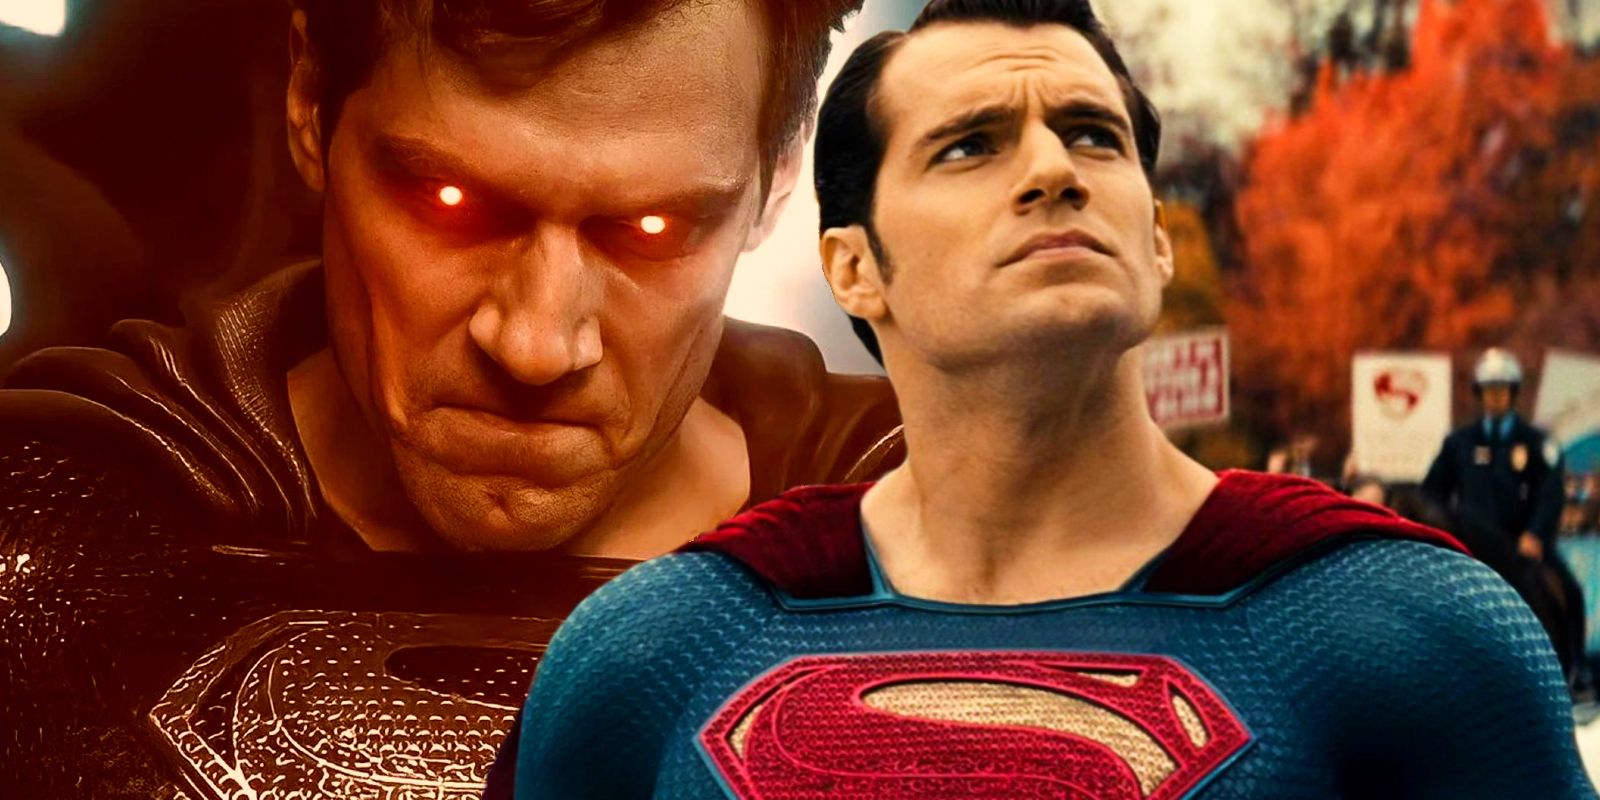 Henry Cavill as Superman in the DCEU